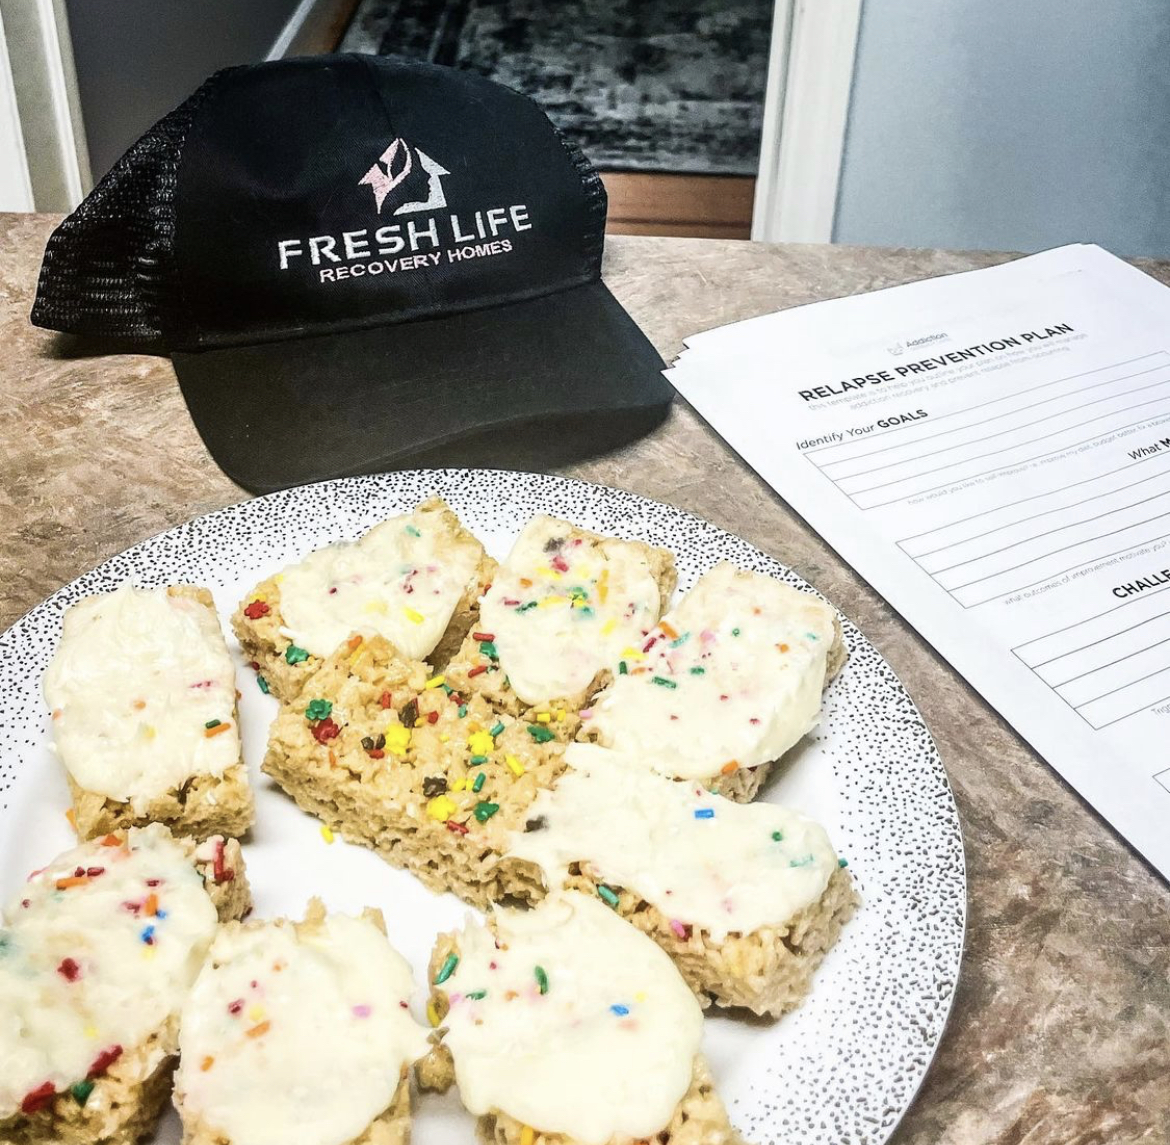 Plate up cake, a Fresh Life Recovery Homes baseball cap, and a Relapse Prevention Plan form on a table at Fresh Life Recovery Homes in Bradenton, Florida